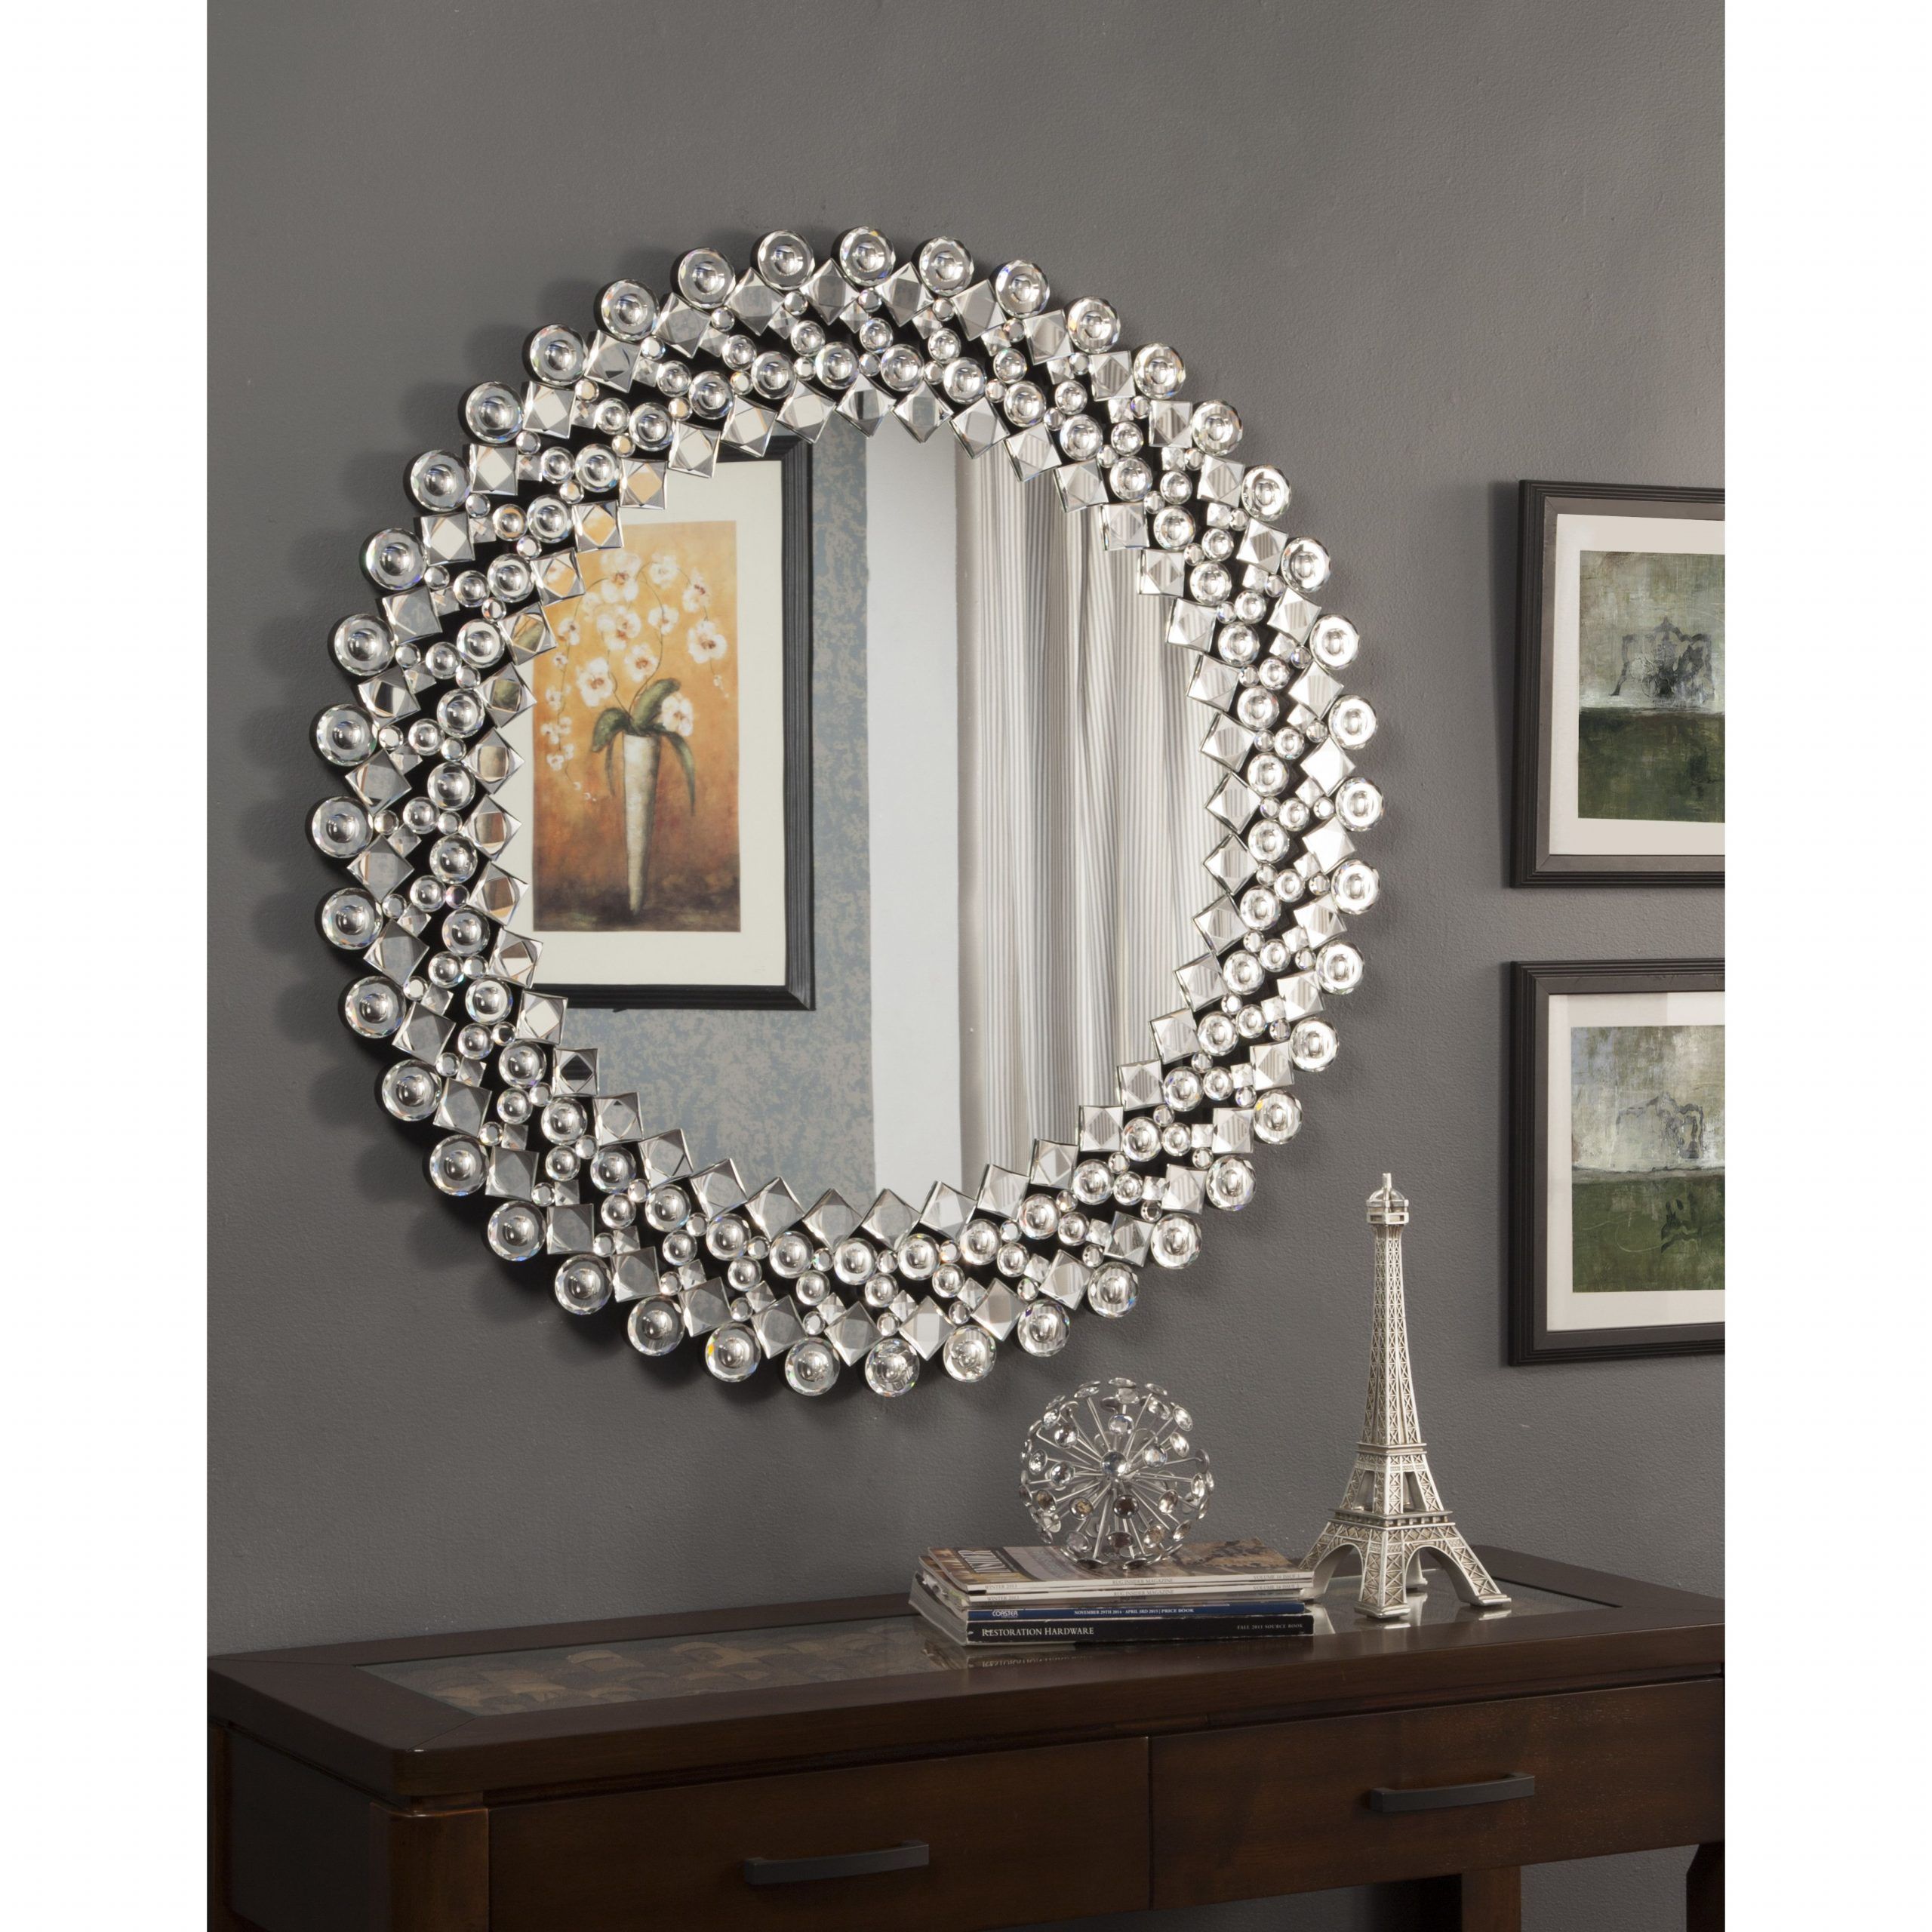 You'll Love The Round Crystal Wall Mirror At Wayfair – Great Deals On Throughout Decorative Round Wall Mirrors (View 5 of 15)